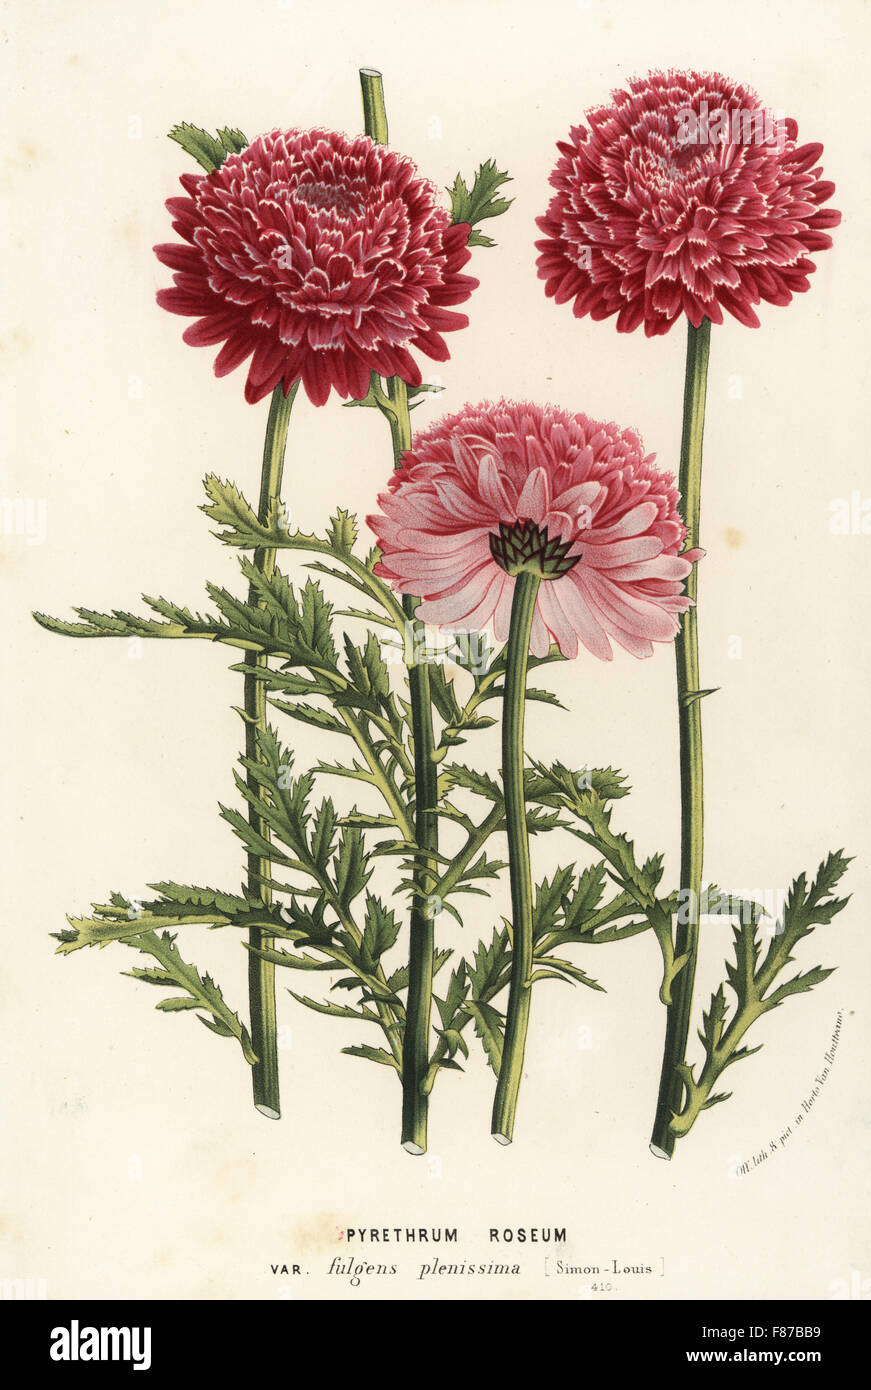 Painted daisy, Chrysanthemum coccineum var. fulgens plenissima (Pyrethrum roseum var. fulgens plenissima). Handcoloured lithograph from Louis van Houtte and Charles Lemaire's Flowers of the Gardens and Hothouses of Europe, Flore des Serres et des Jardins de l'Europe, Ghent, Belgium, 1867-1868. Stock Photo